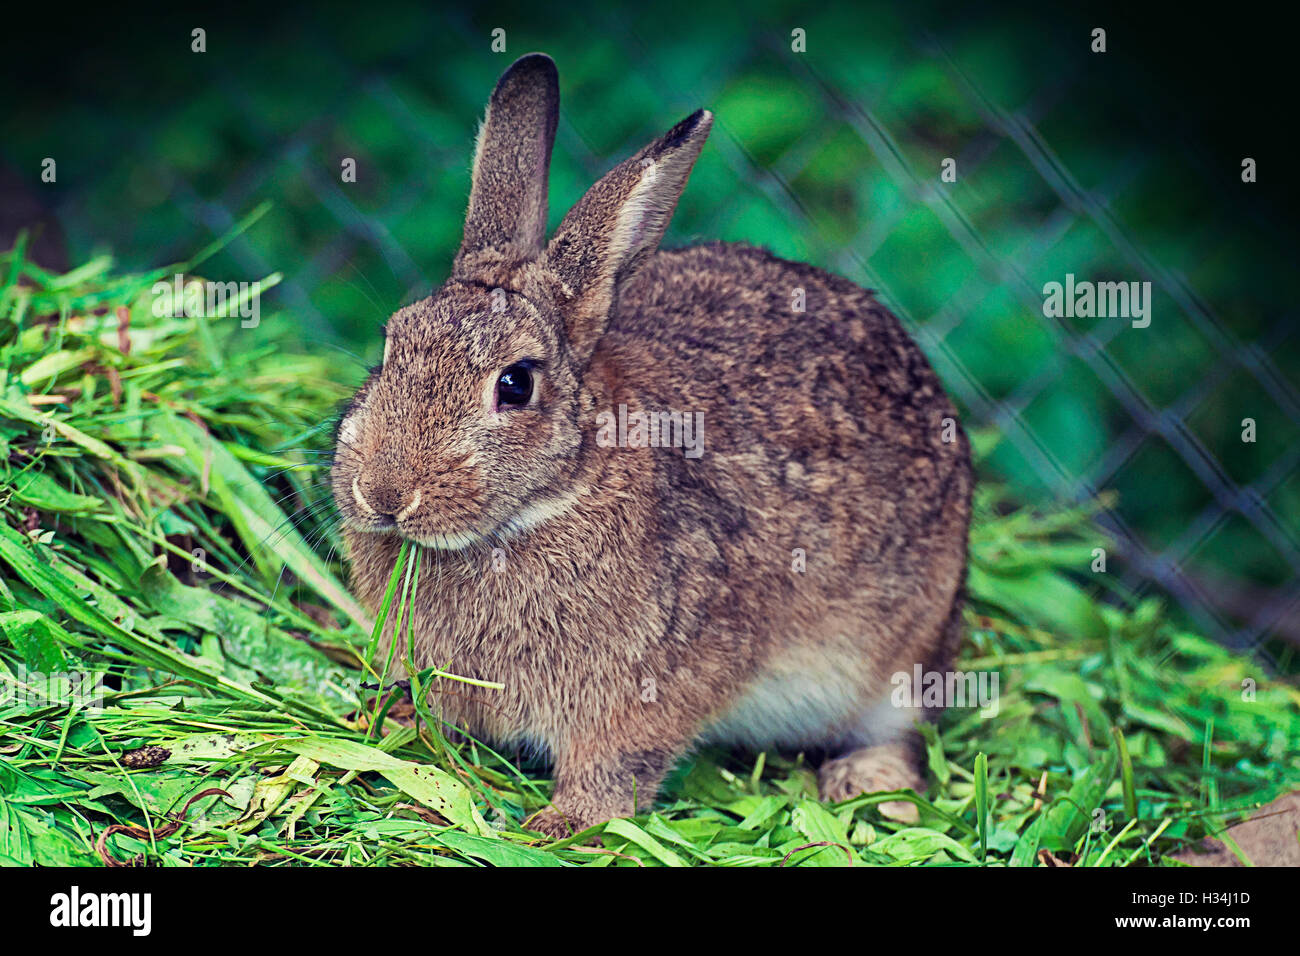 Farm animal, brown rabbit squatted on green grass eating Stock Photo